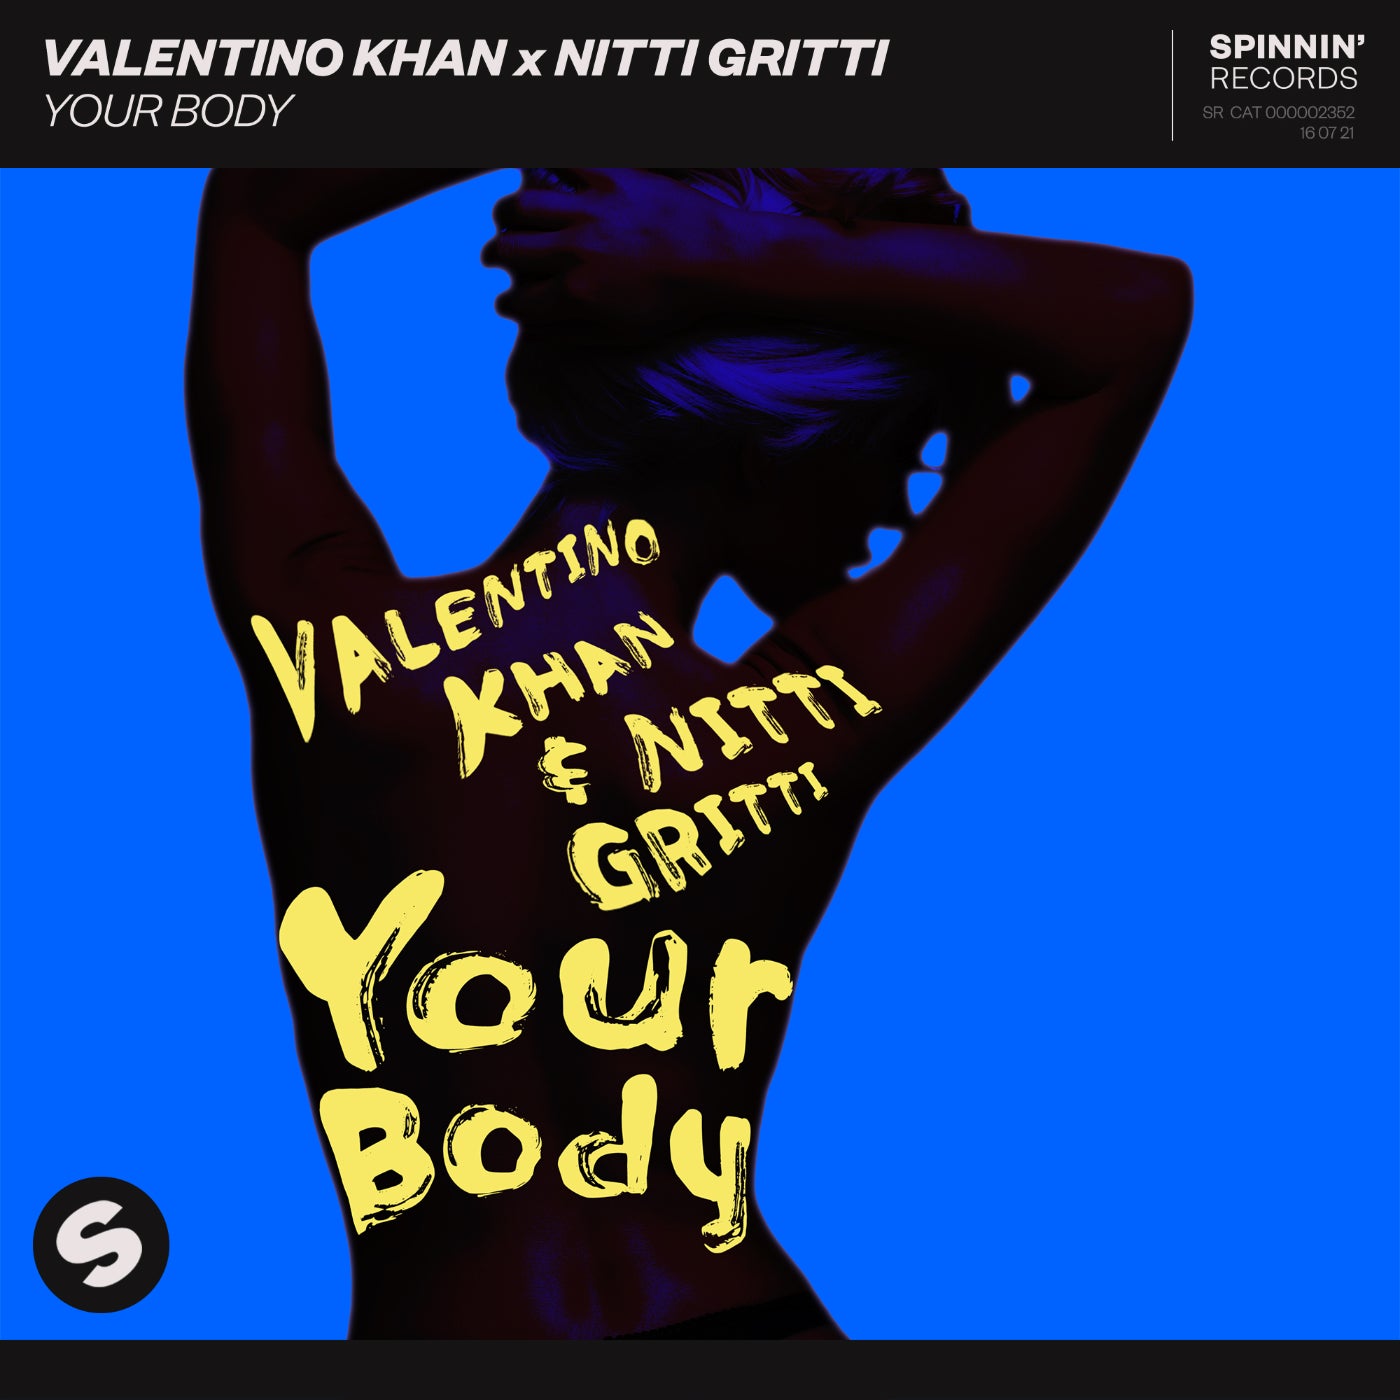 Valentino Khan x Nitti Gritti - Your Body (Extended Mix)